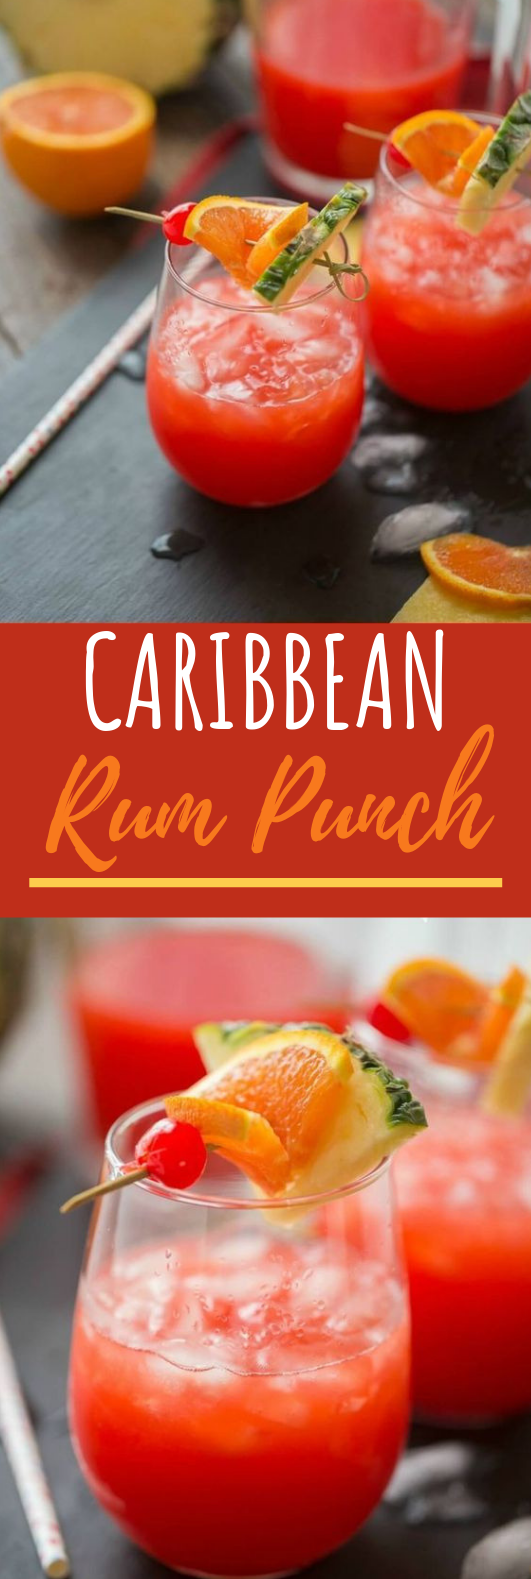 Caribbean Rum Punch #drinks #punch